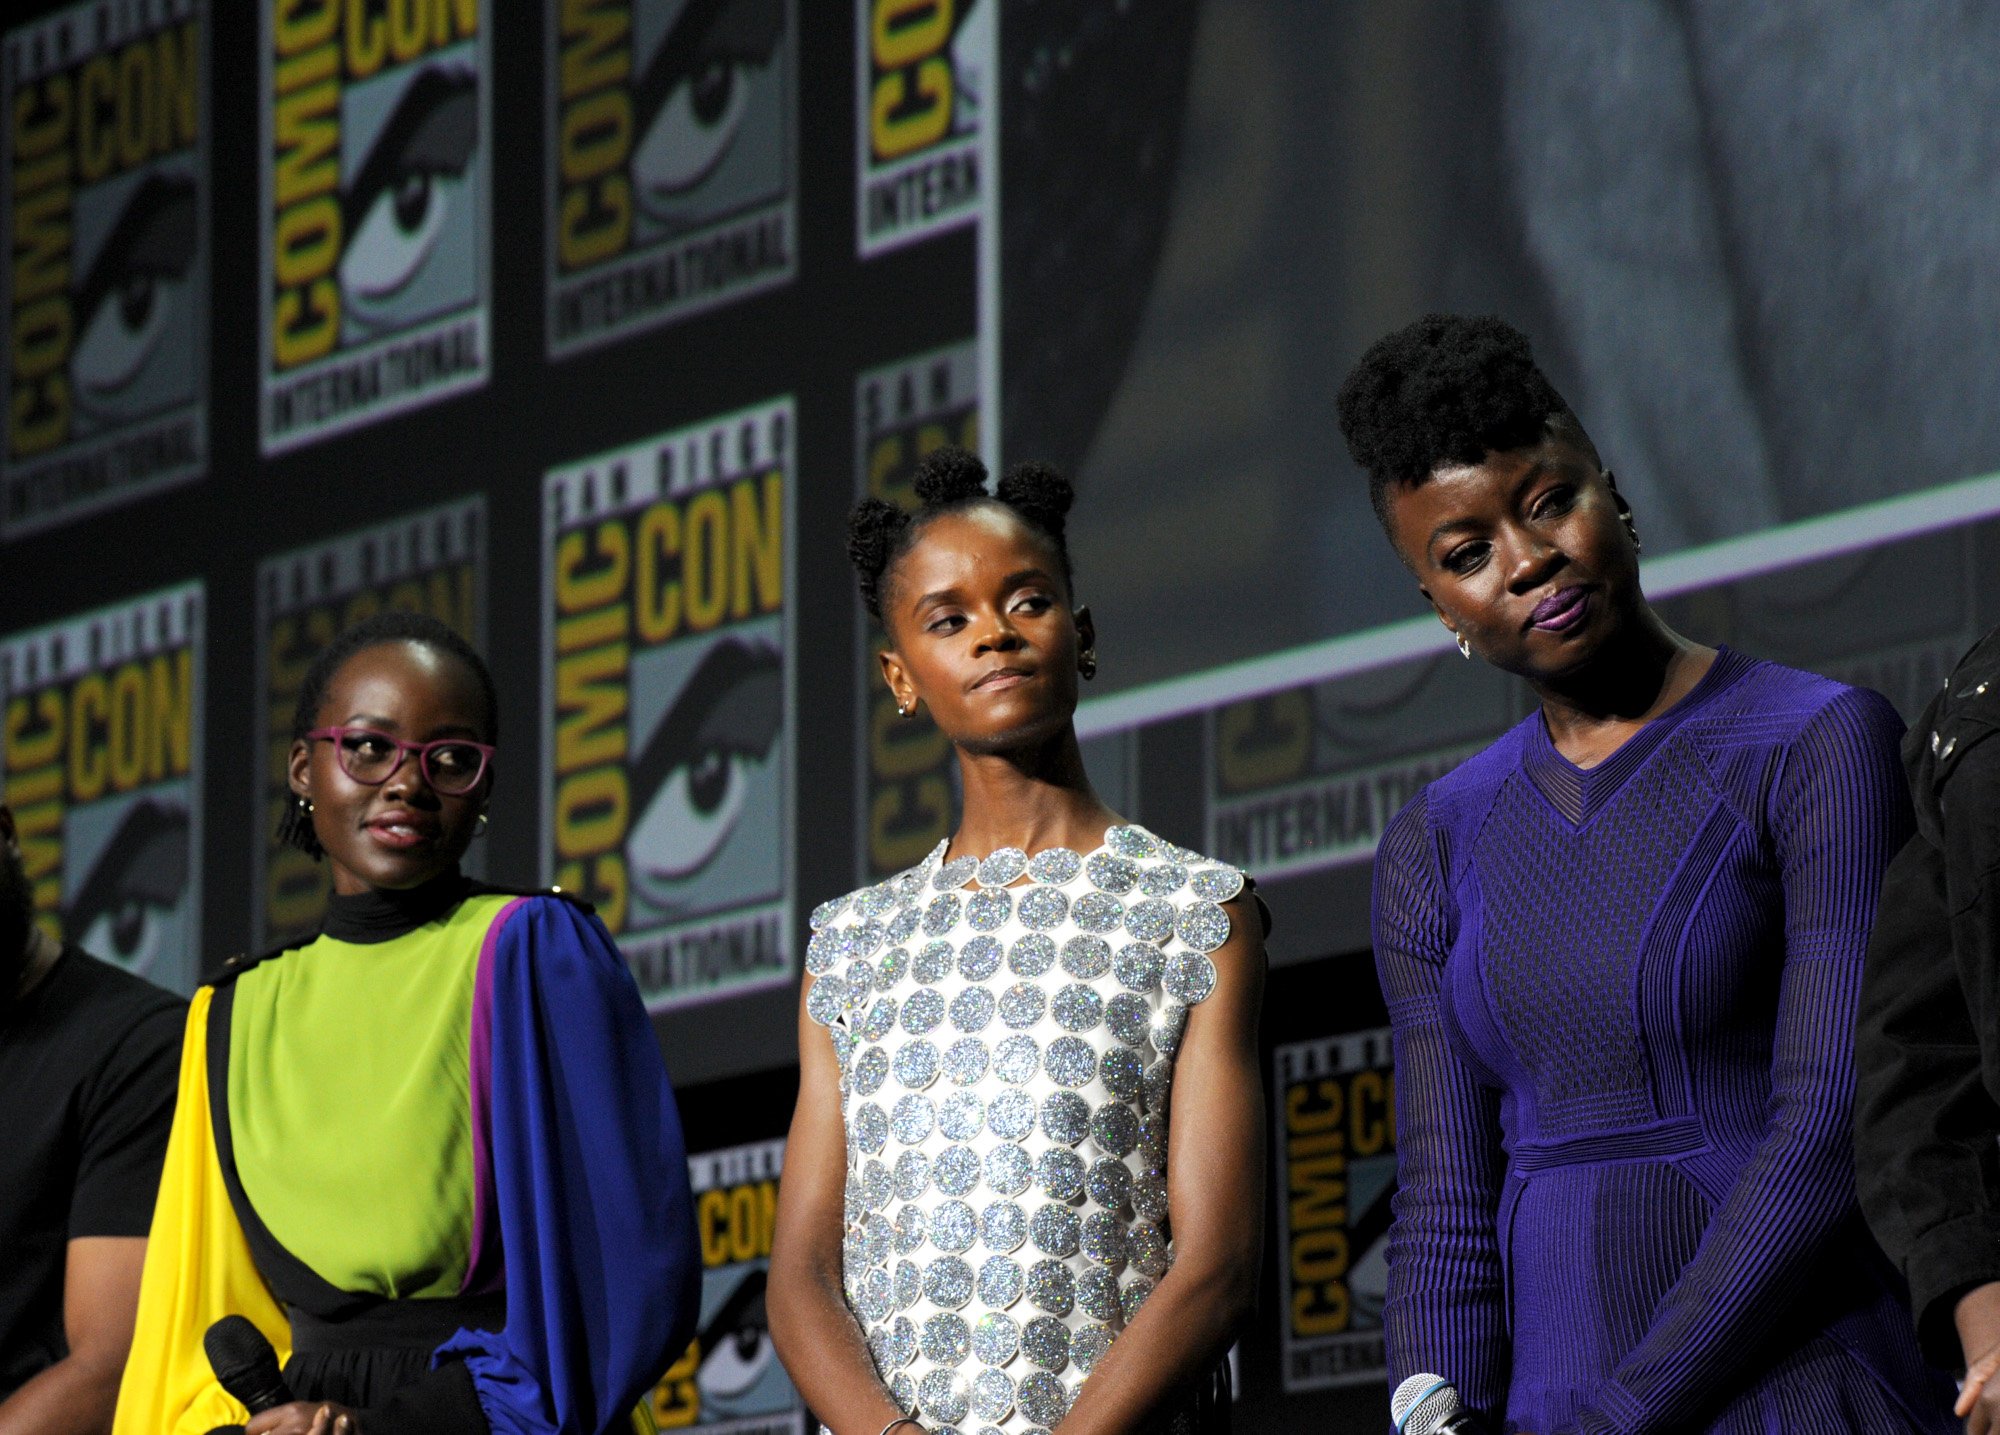 Lupita Nyong'o, Letitia Wright, and Danai Gurira during the 'Black Panther: Wakanda Forever' panel at San Diego Comic-Con, which also debuted the first trailer. The three are standing next to one another, and they're looking at something to the left of the camera.